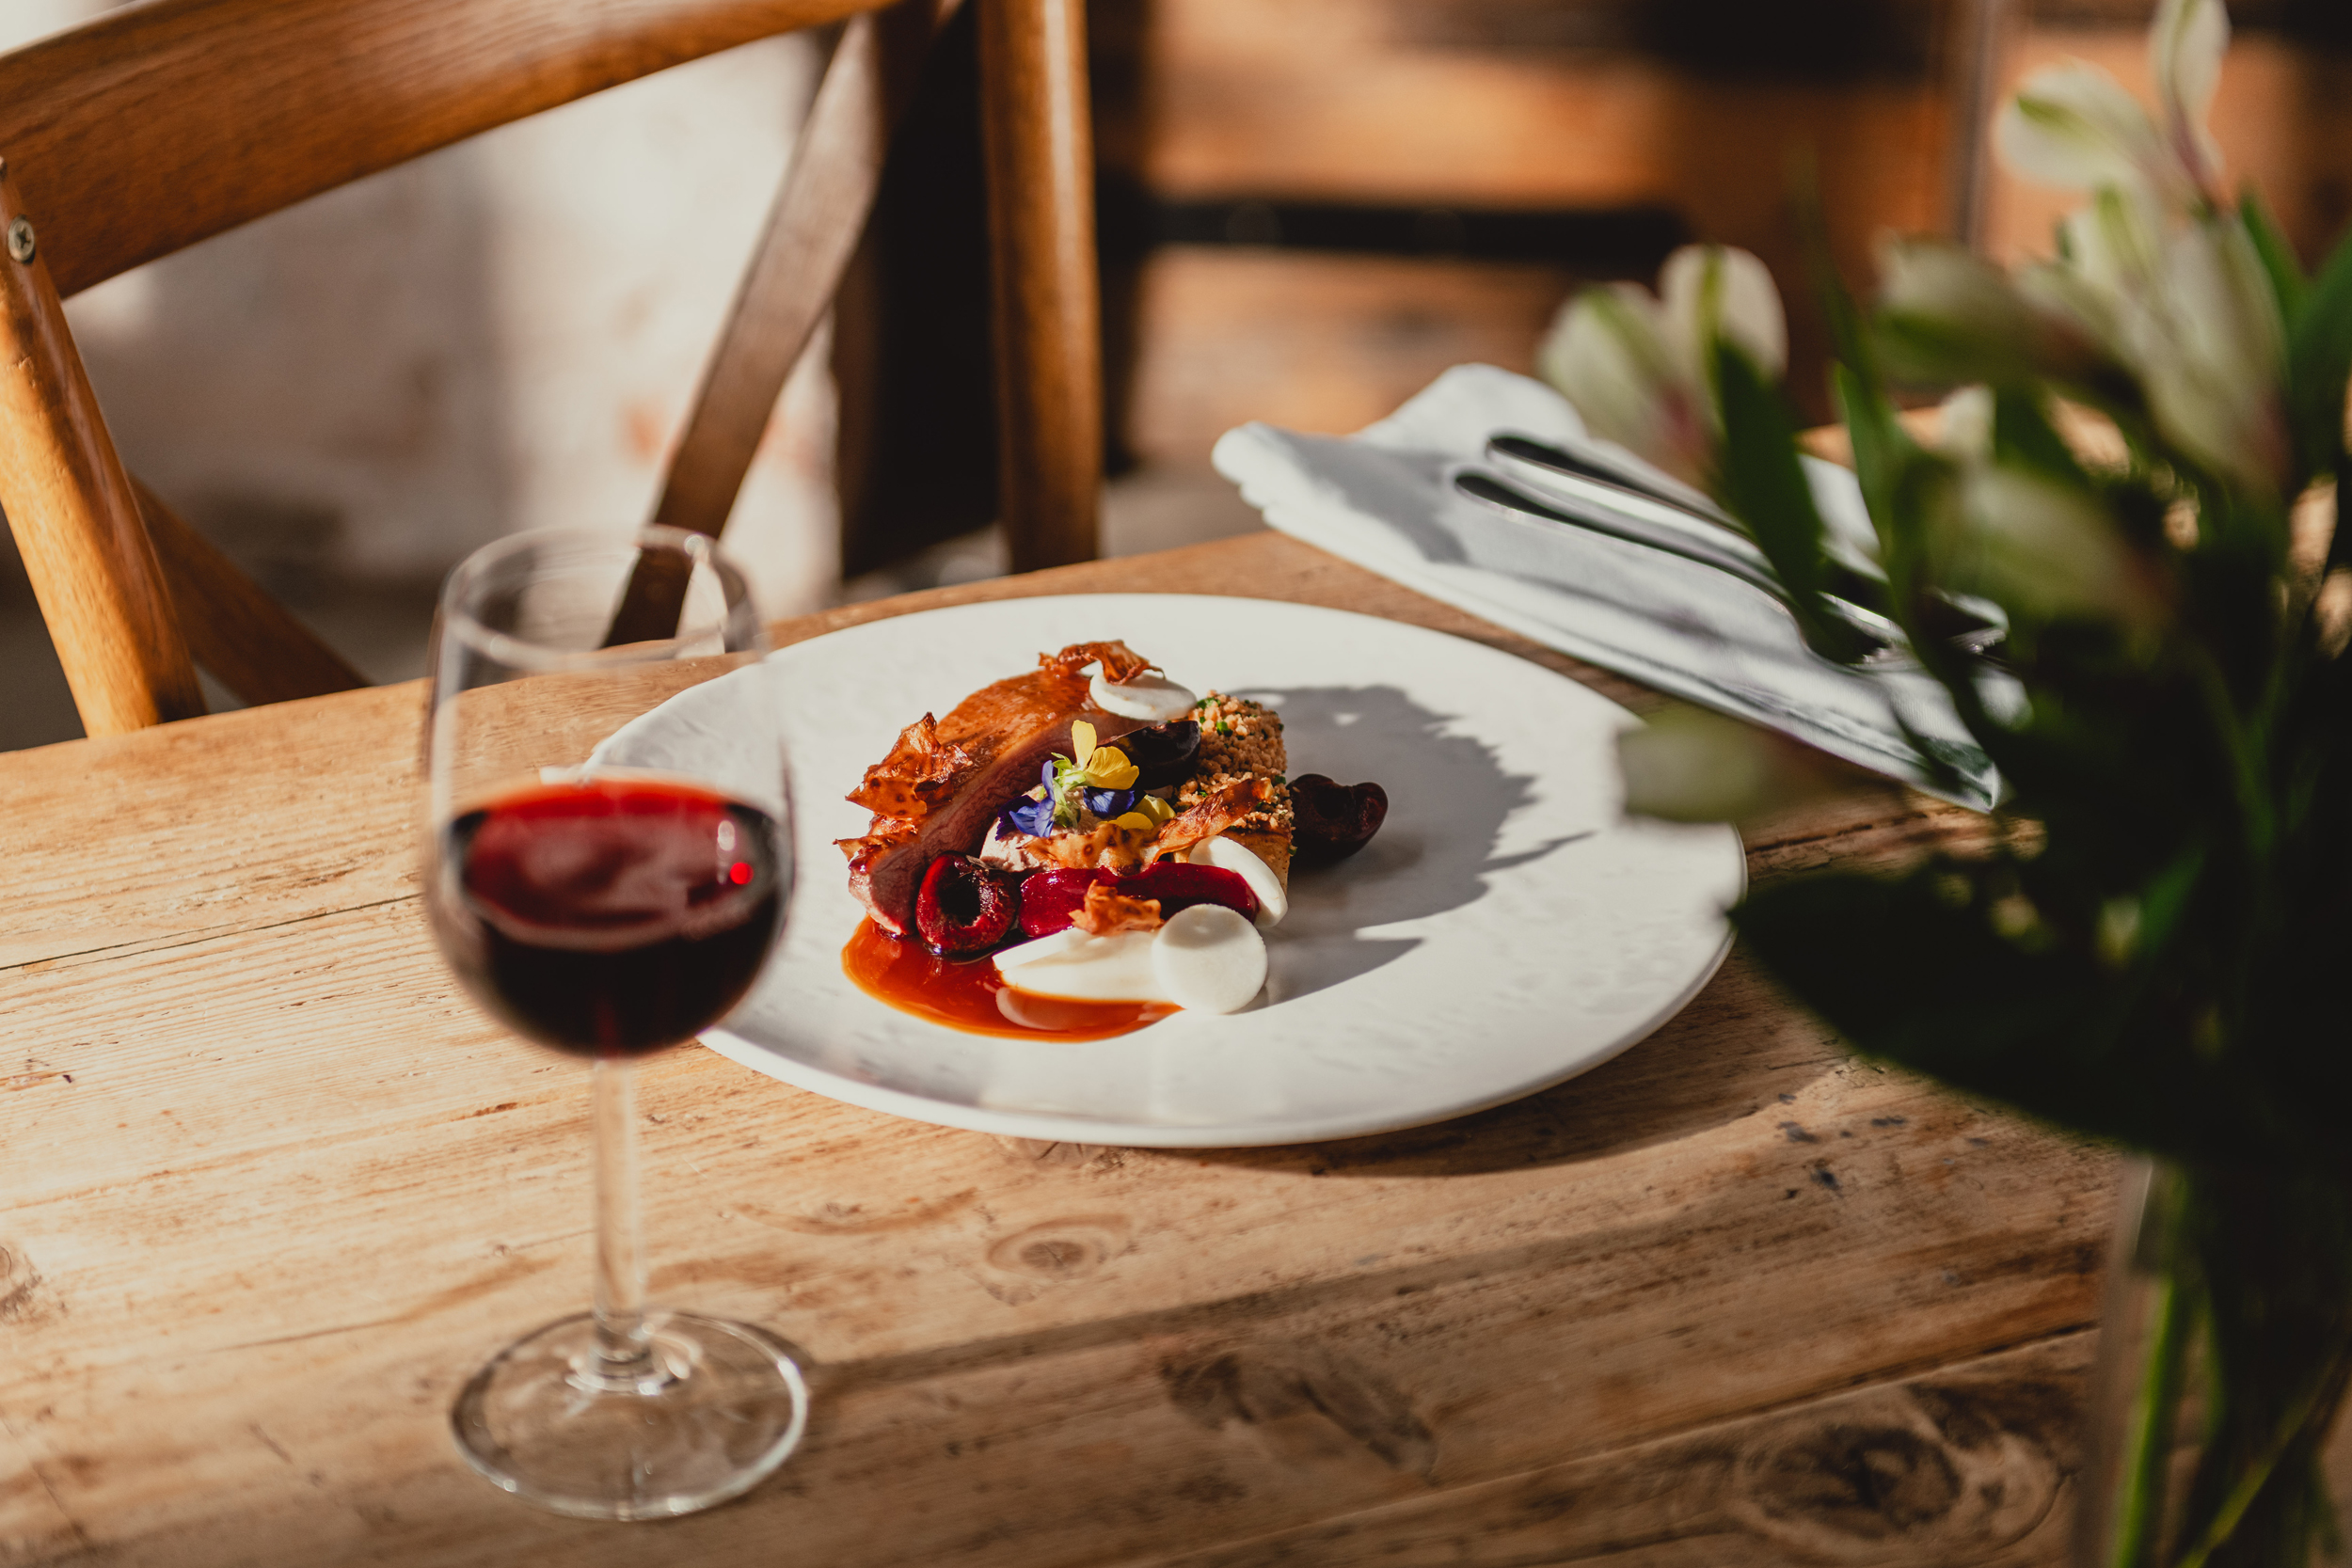 A glass of red wine on a rustic wooden table accompanies a white plate on which an elegant arrangement of meat garnished with flavourings resides.